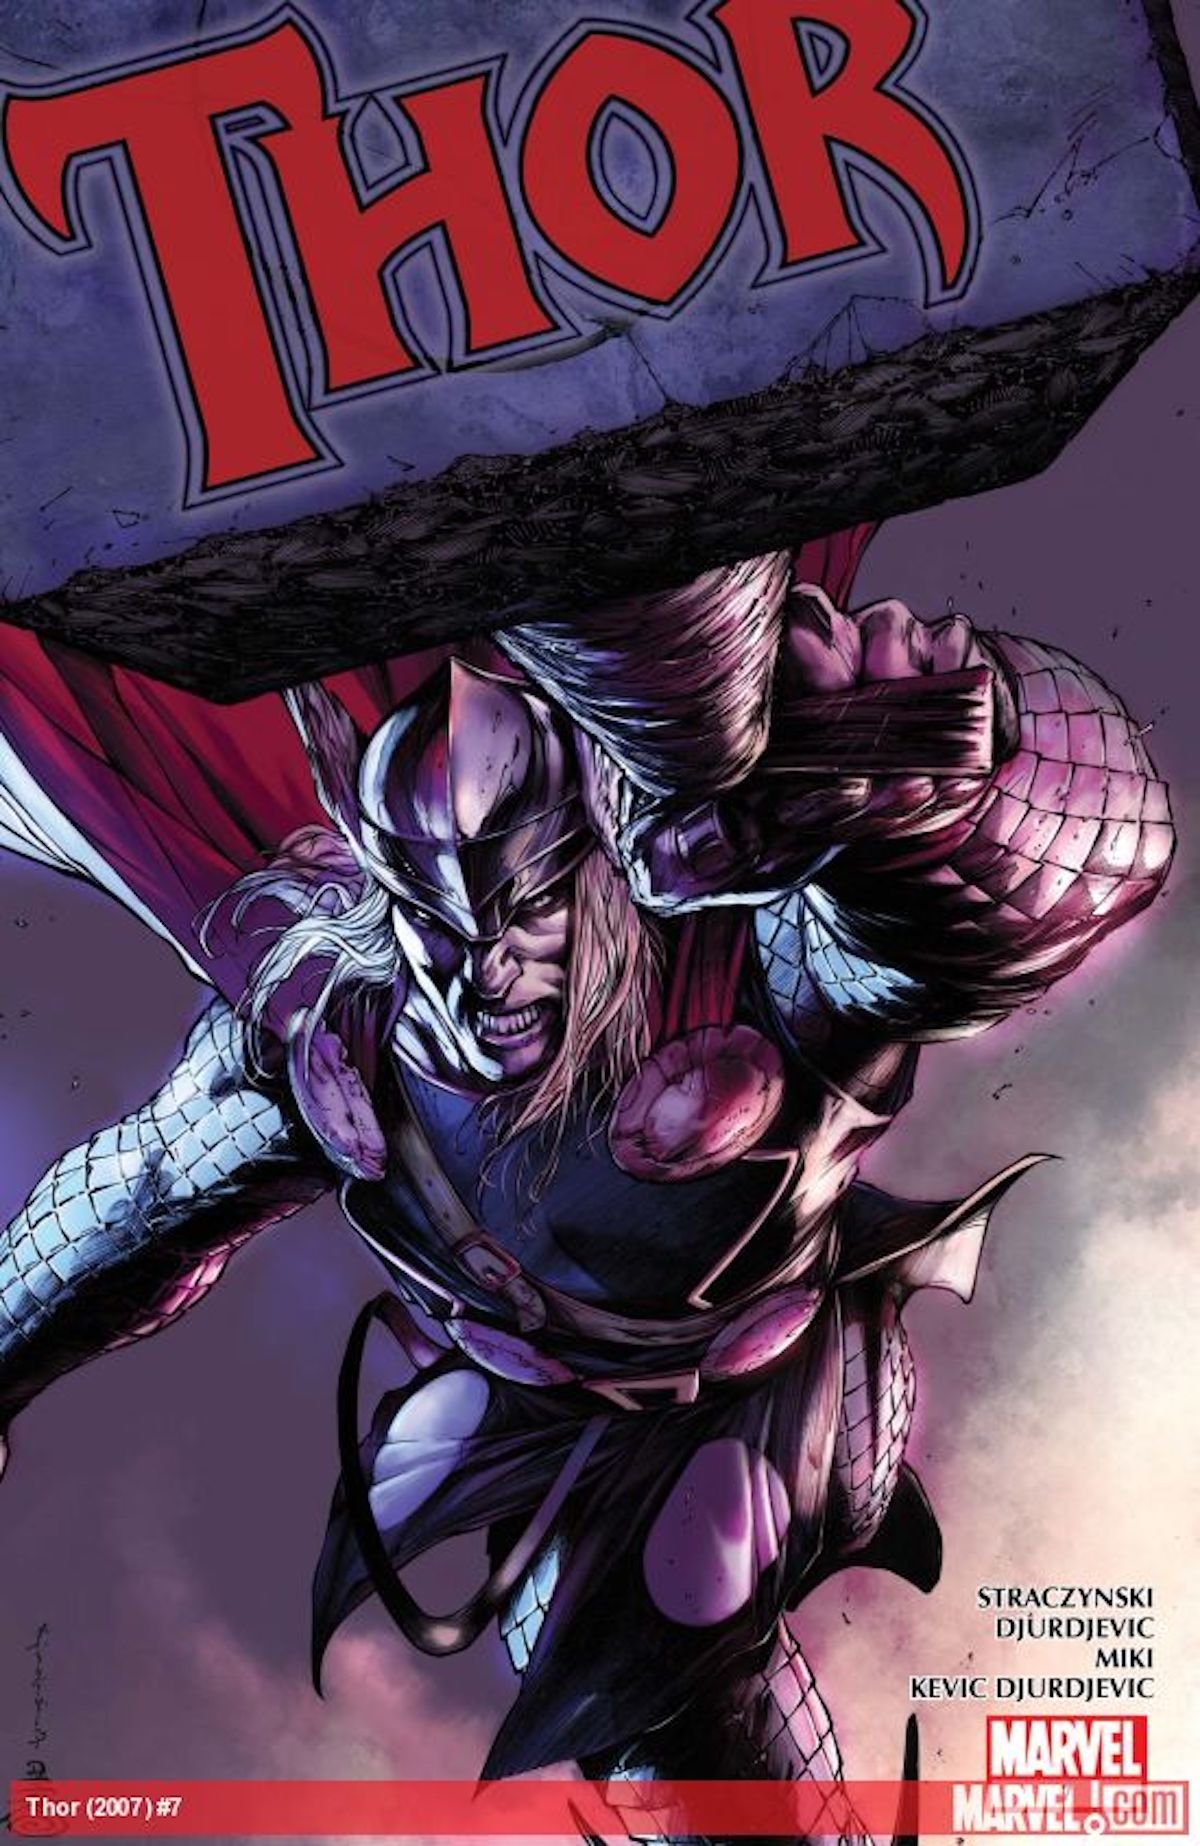 Thos screams while holding Mjolnir on a Marvel Comics cover